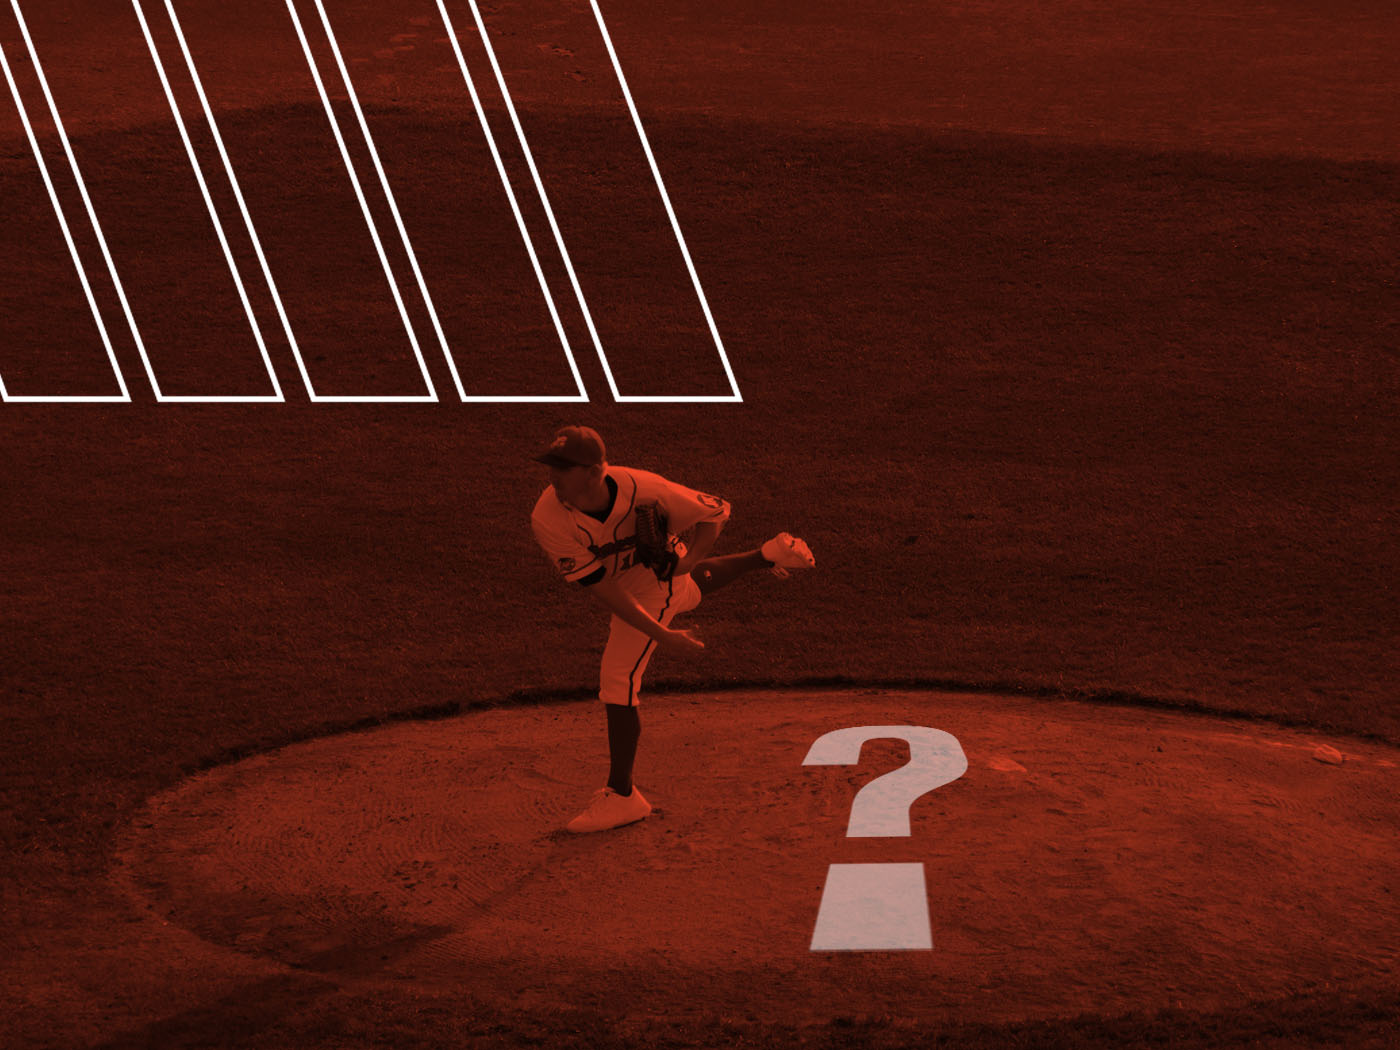 Why is the Pitcher's Mound Elevated?